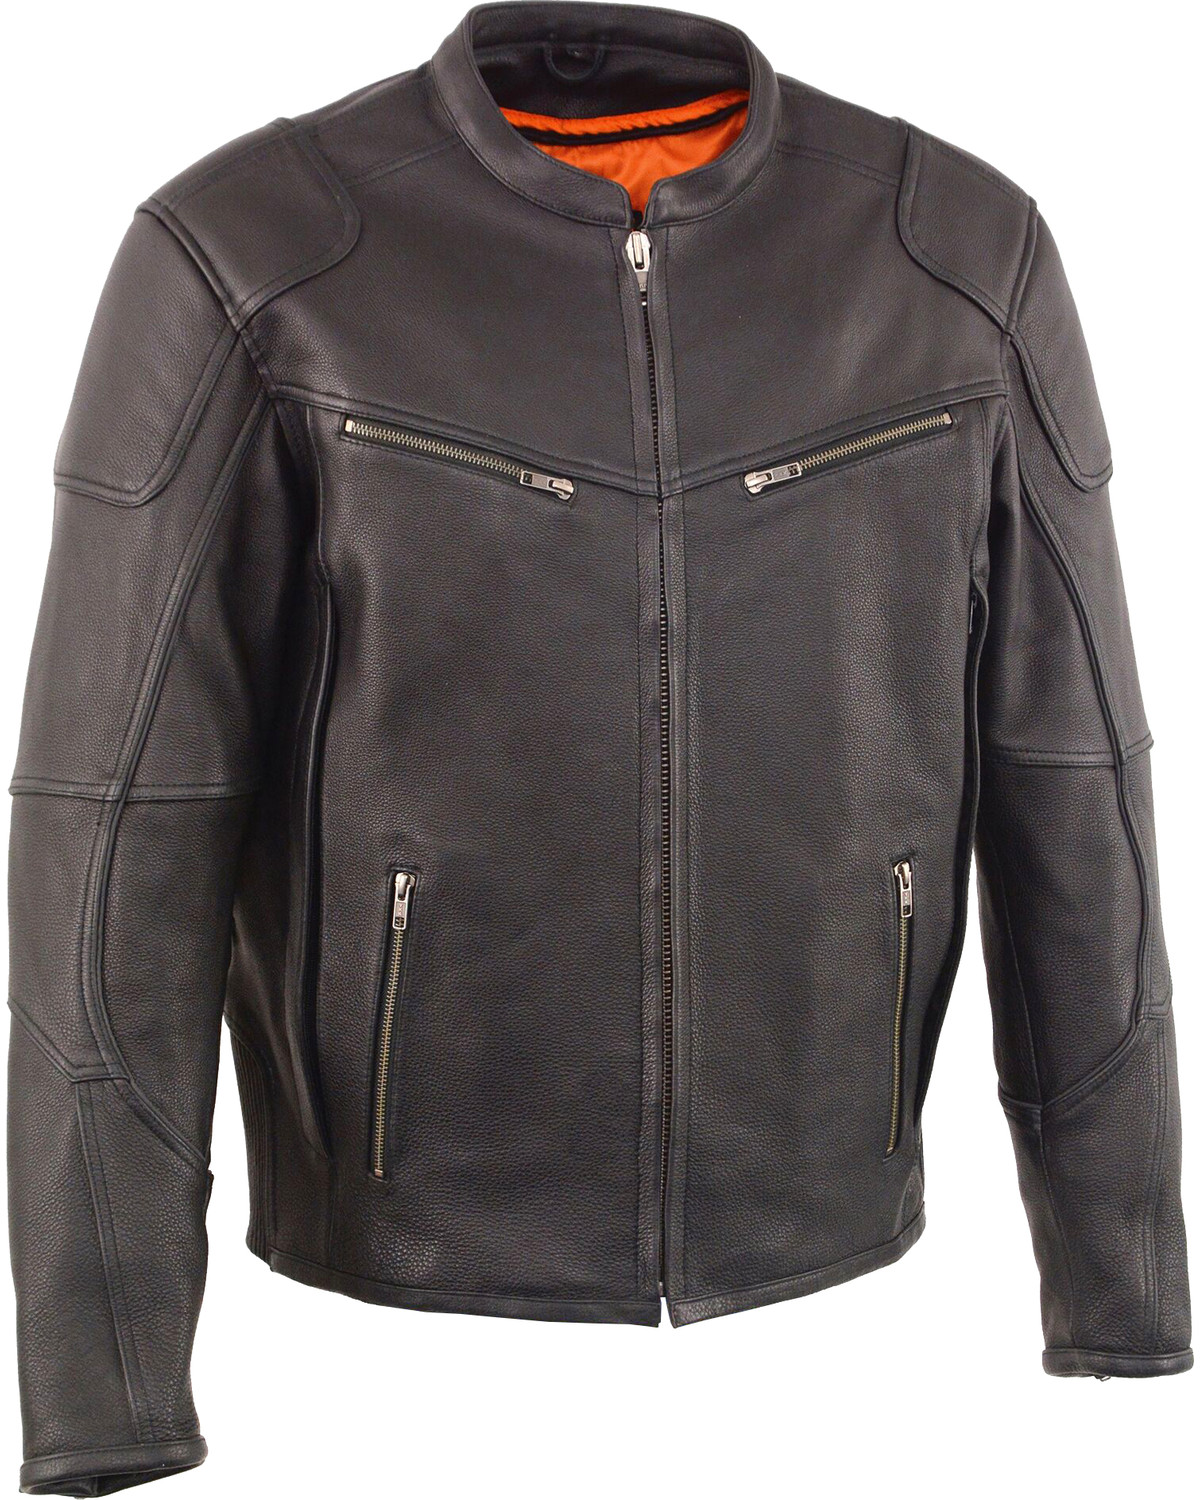 Milwaukee Leather Men's Cool Tec Scooter Jacket